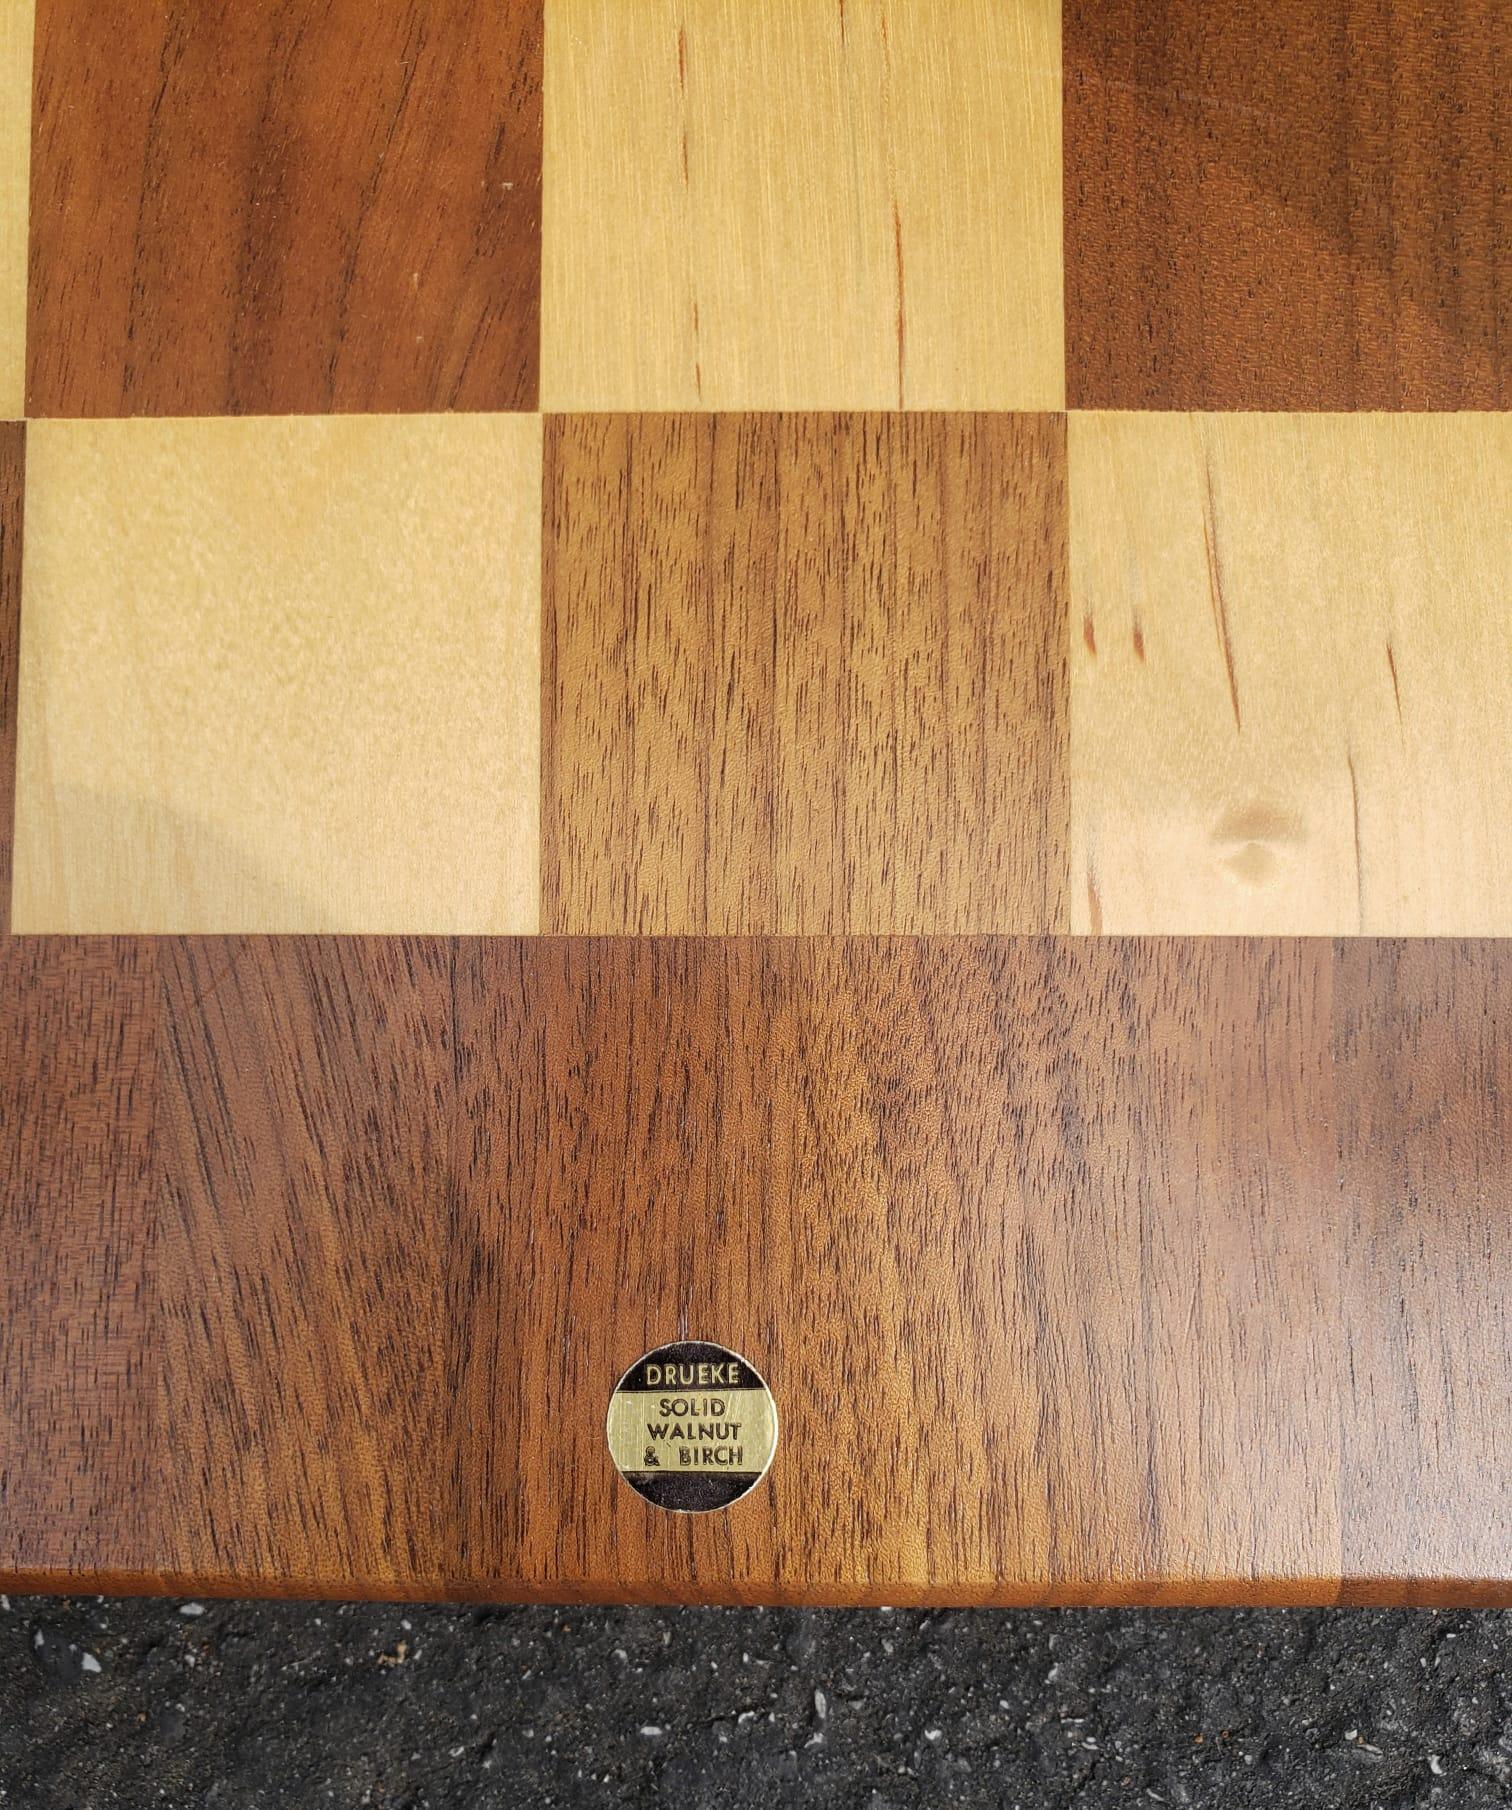 Drueke Solid Walnut and Birch Parquetry Double Sided Games Table In Good Condition For Sale In Germantown, MD